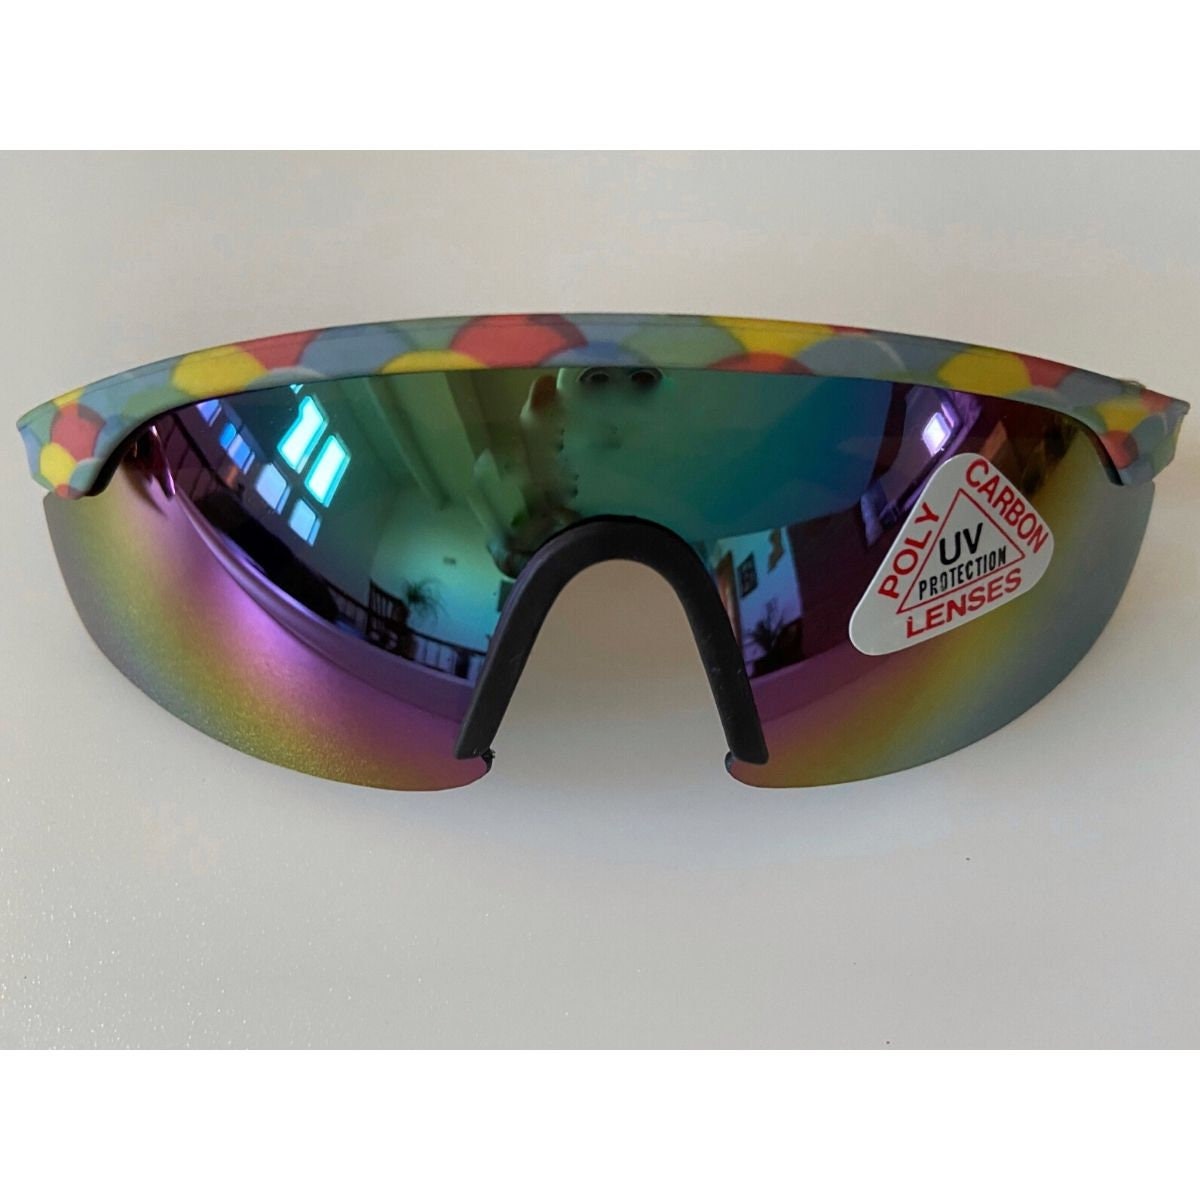 Pit Viper Kids Eyewear for Youth Outdoor Sunglasses Sport